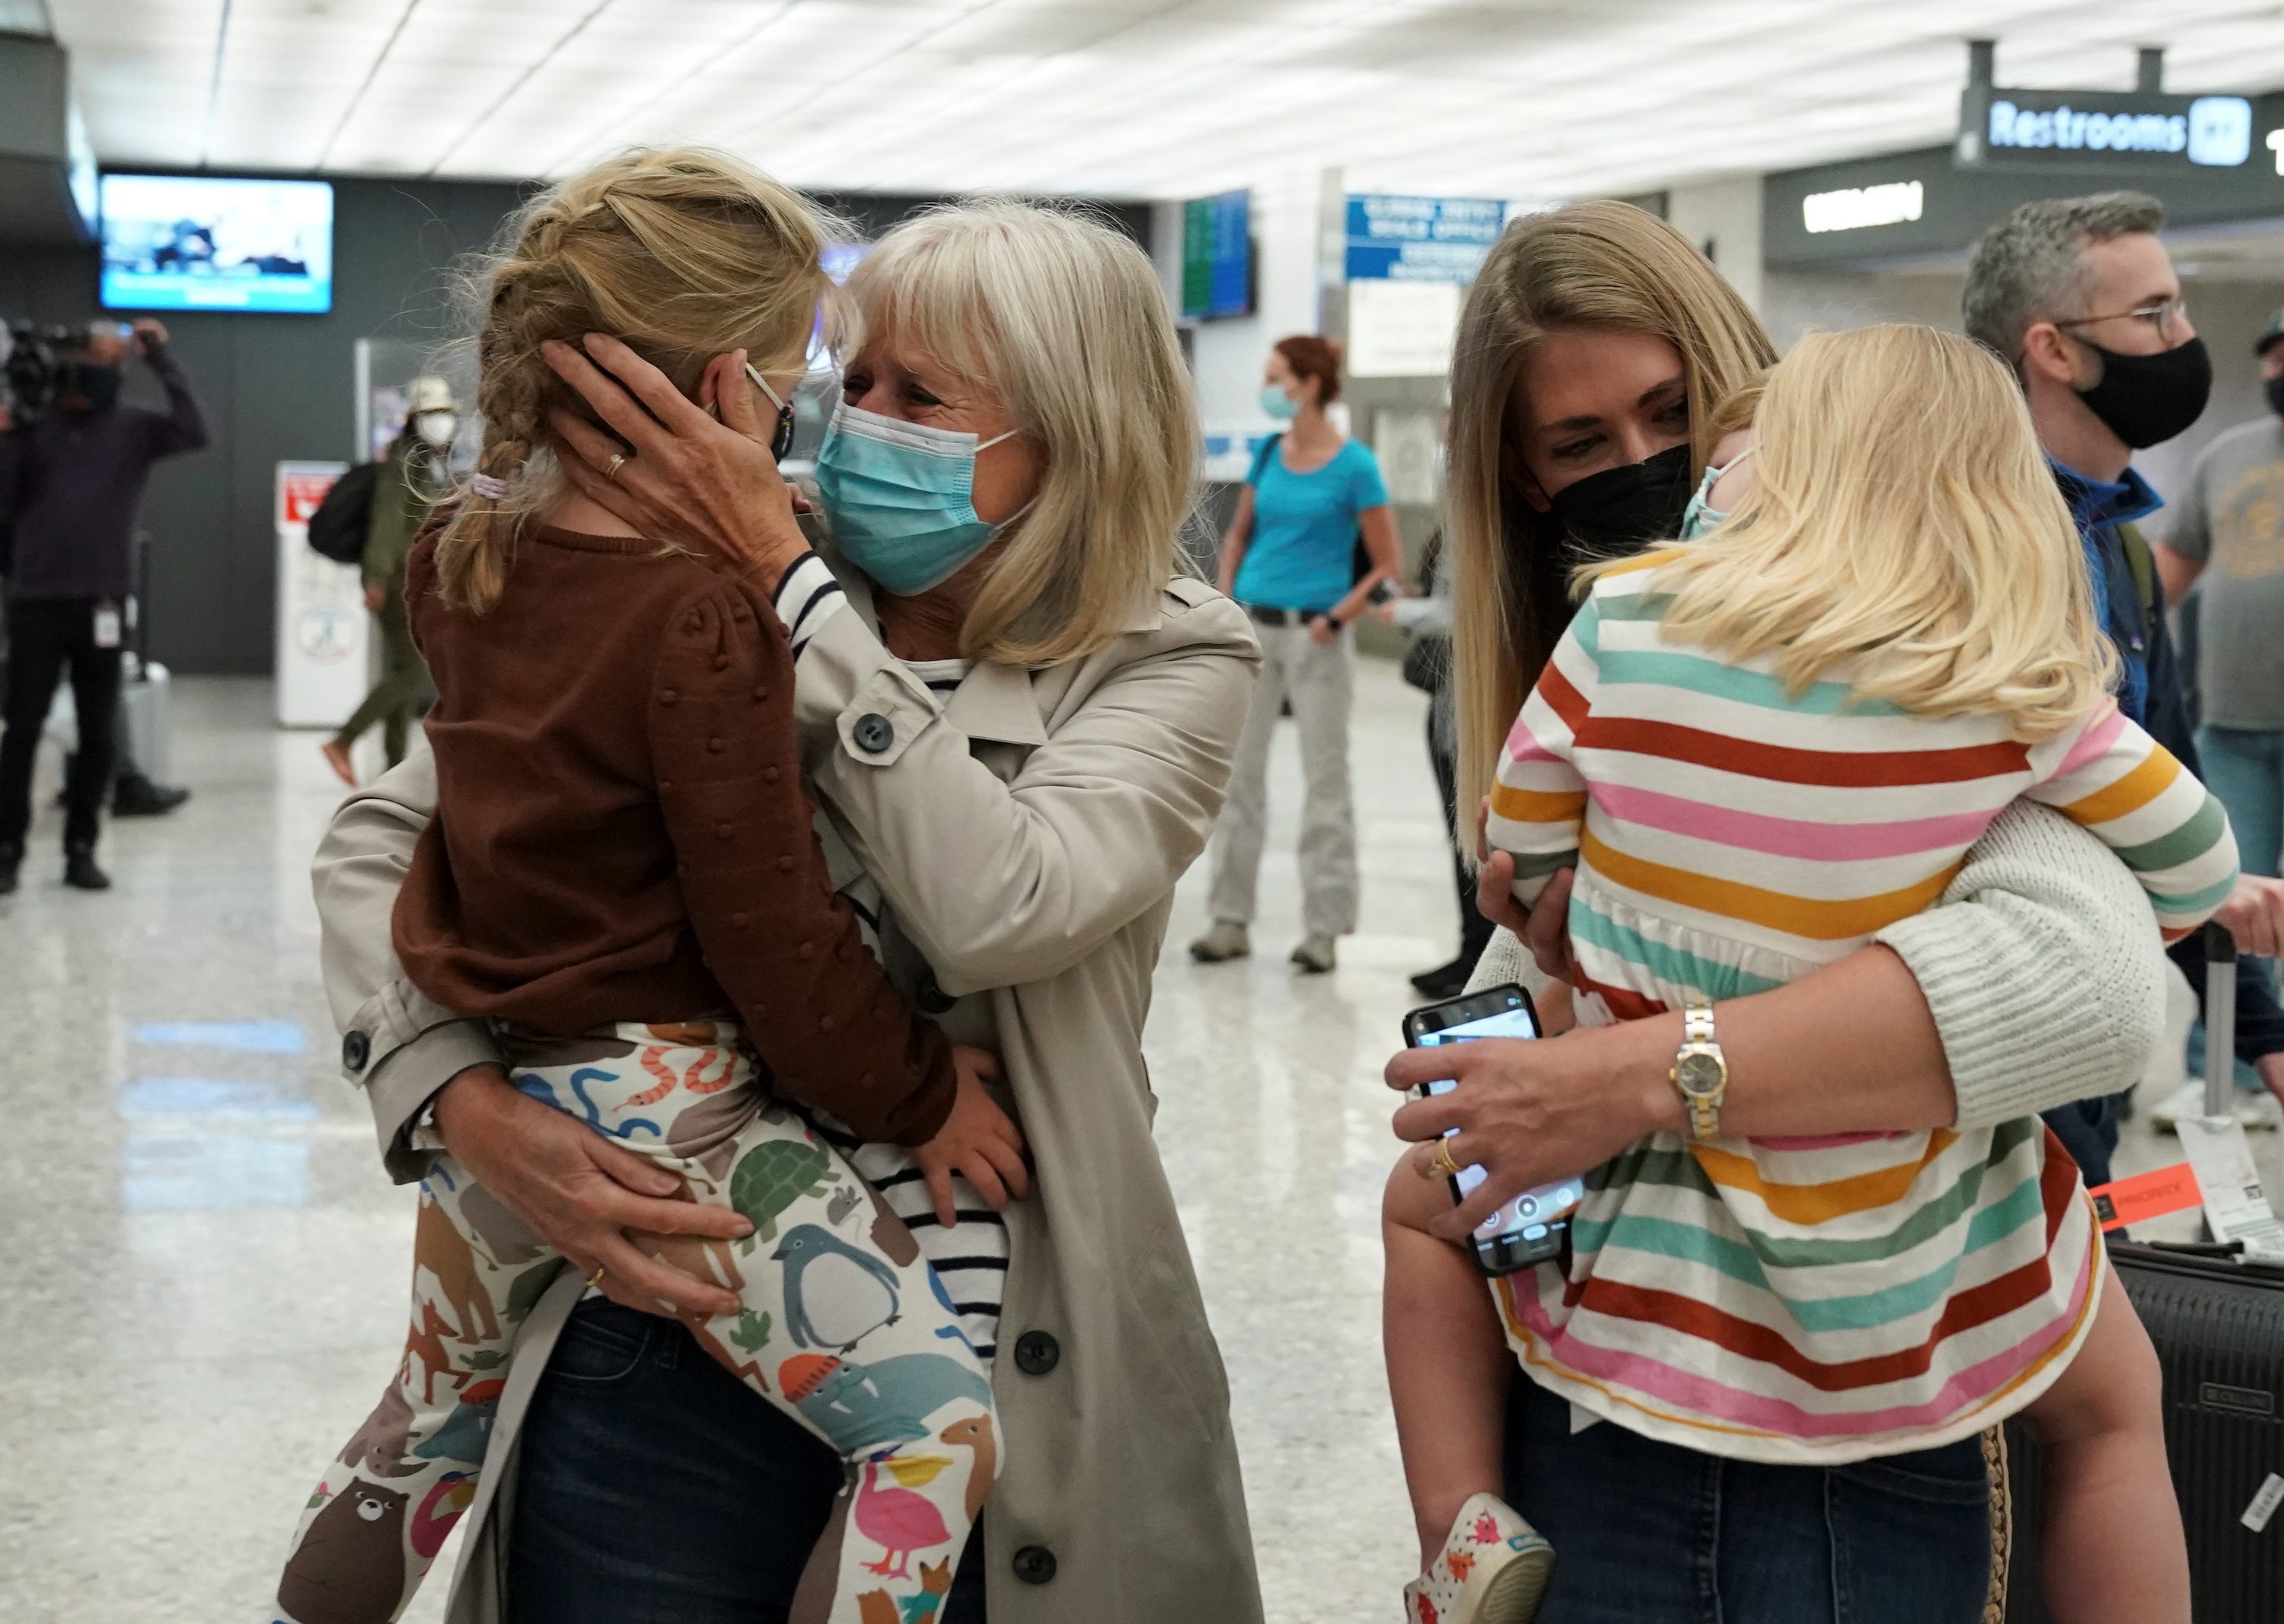 Families reunite in US with tears, balloons as COVID-19 travel ban ends